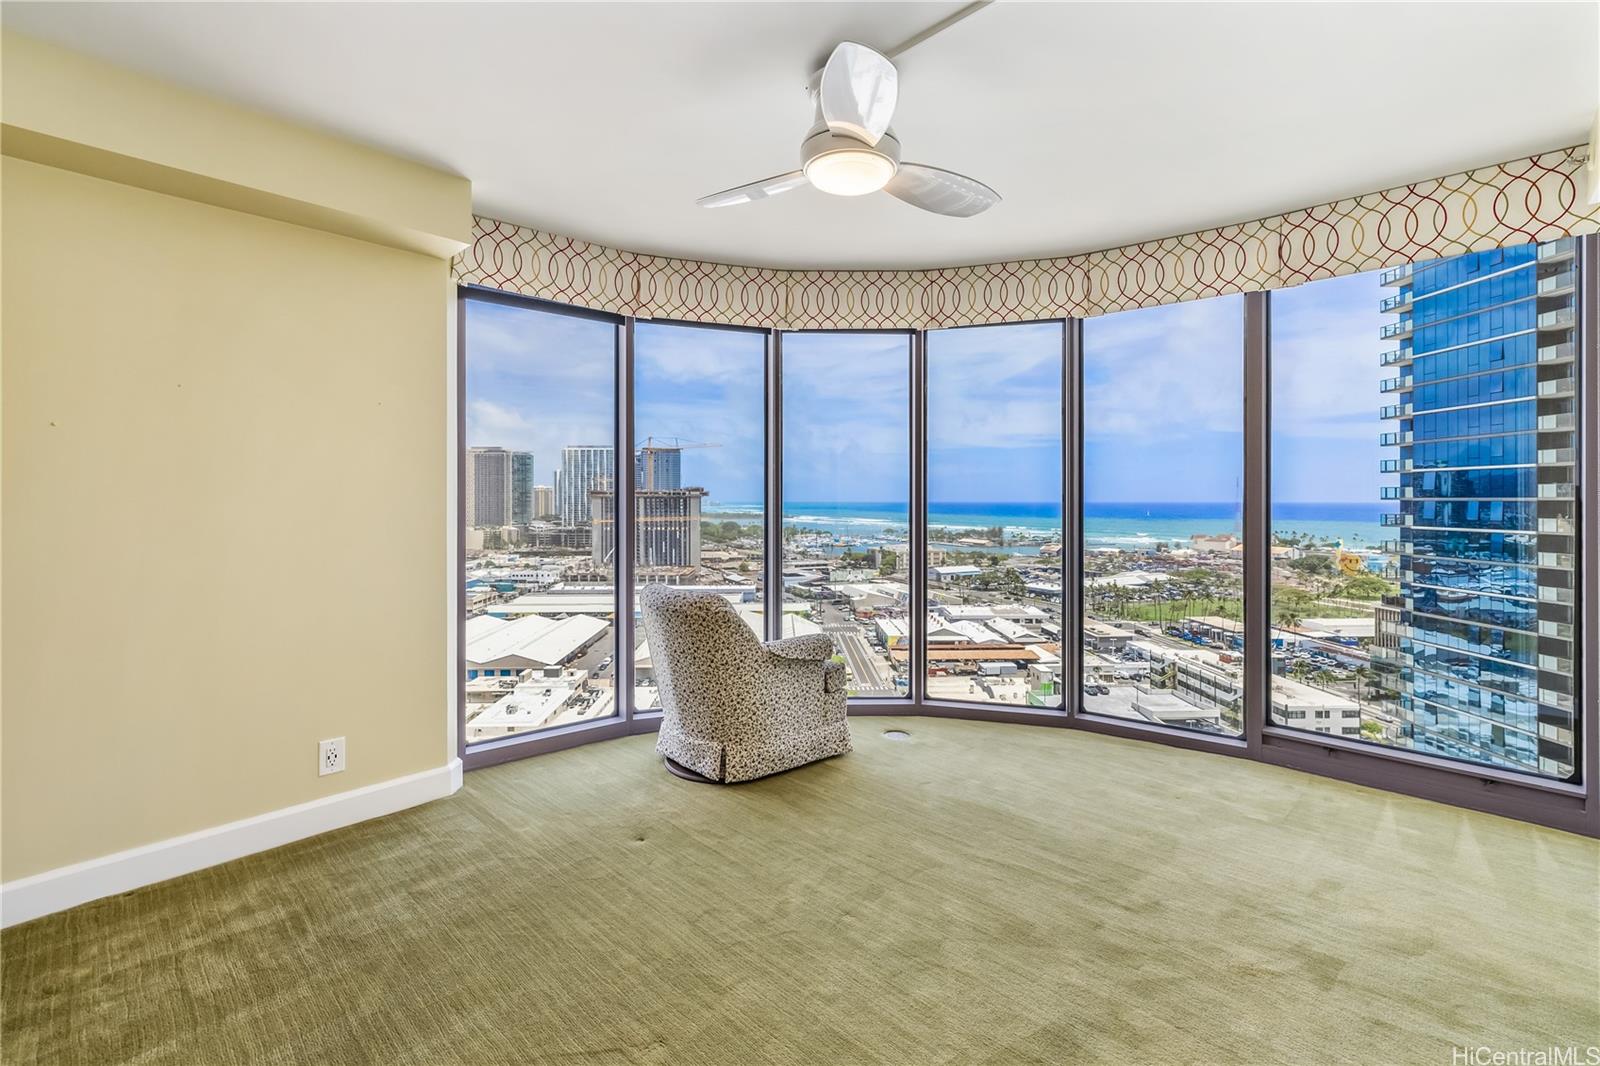 One Waterfront Tower 415 South Street  Unit 2301 (Makai Tower)